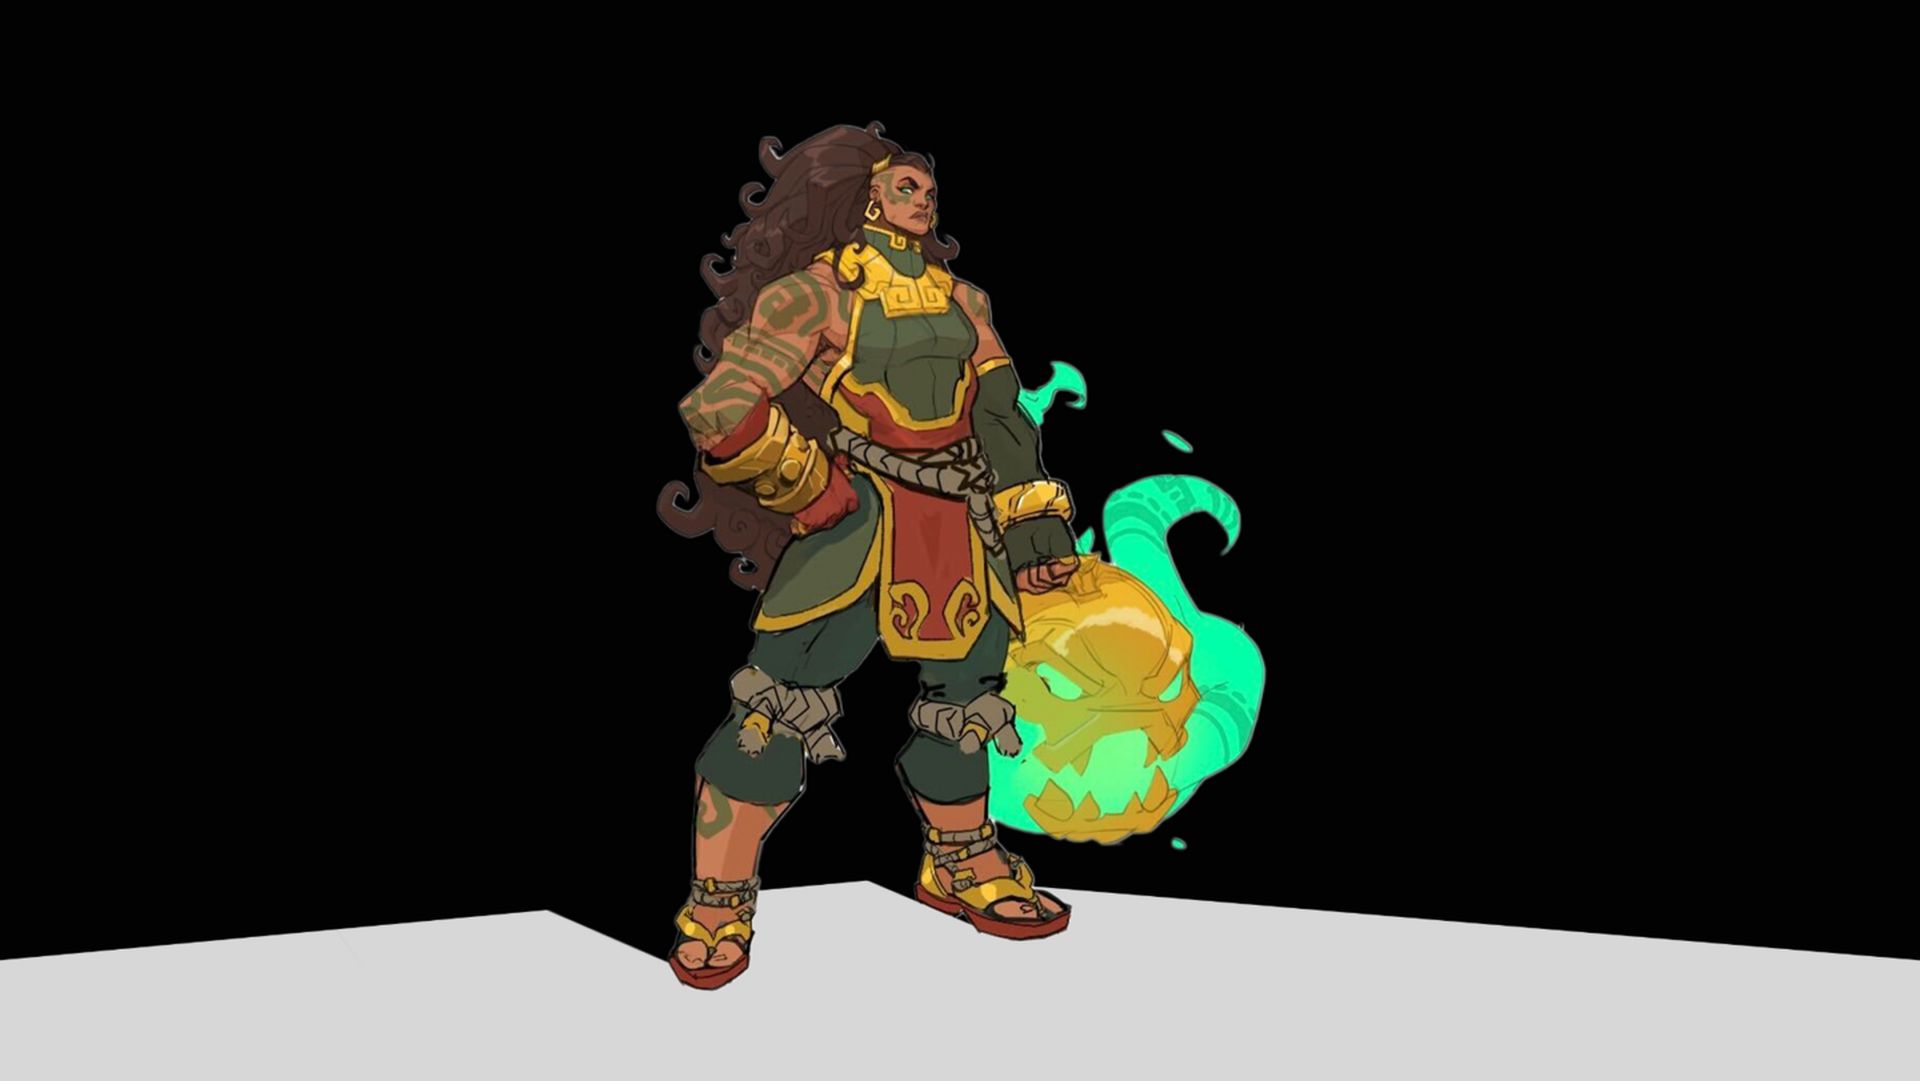 ILLAOI GUIDE: How to play Illaoi for Beginners - League of Legends Season  12 Champion Guide 